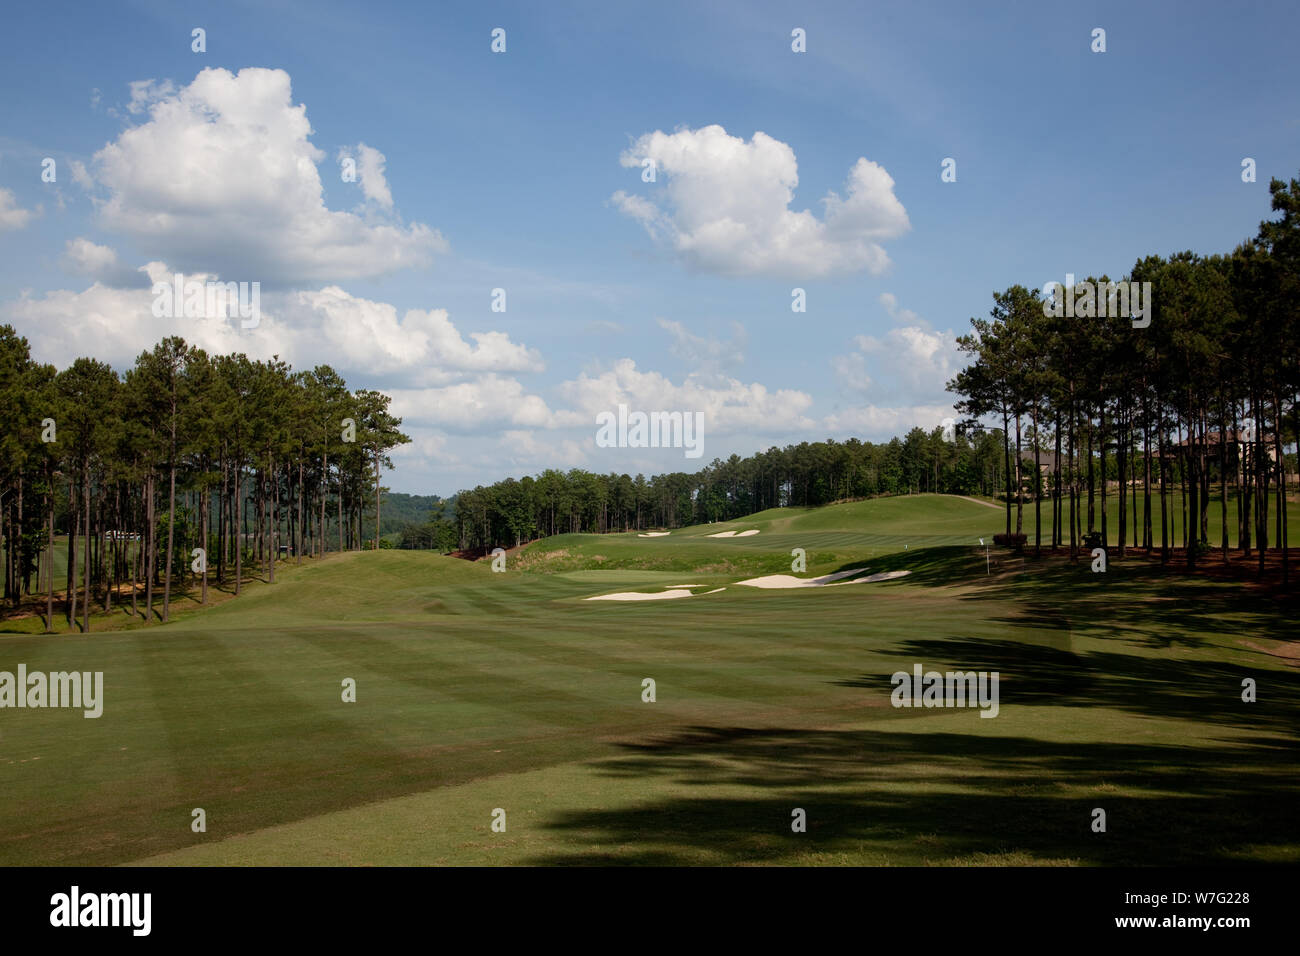 Alabama welcomes the newest addition to the Robert Trent Jones Golf Trail, Ross Bridge, located in Hoover near Birmingham, Alabama Stock Photo